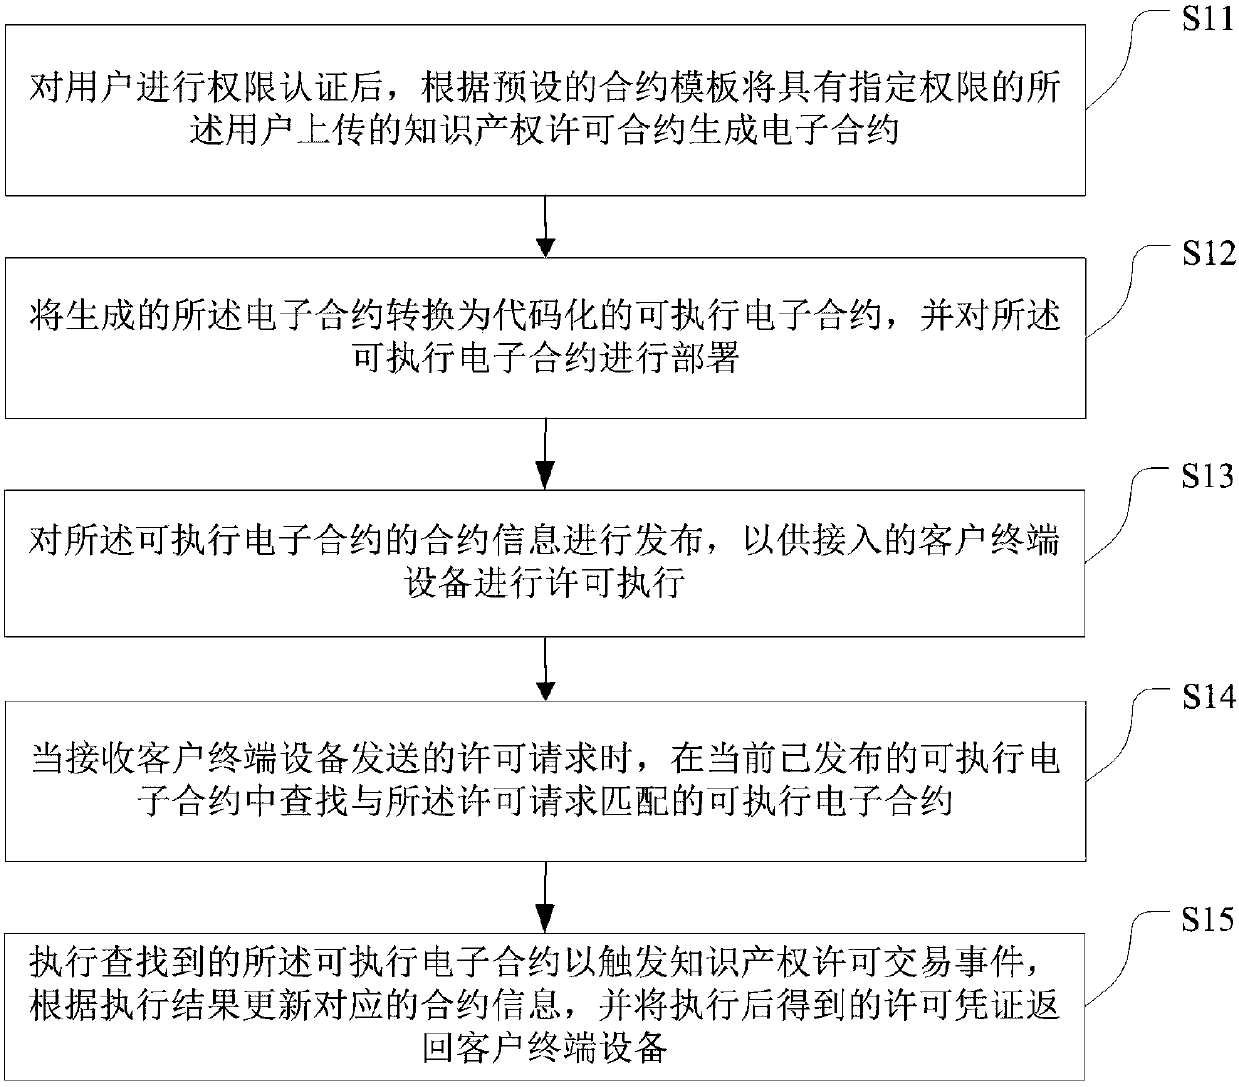 Internet of Things based intellectual property licensing method and system